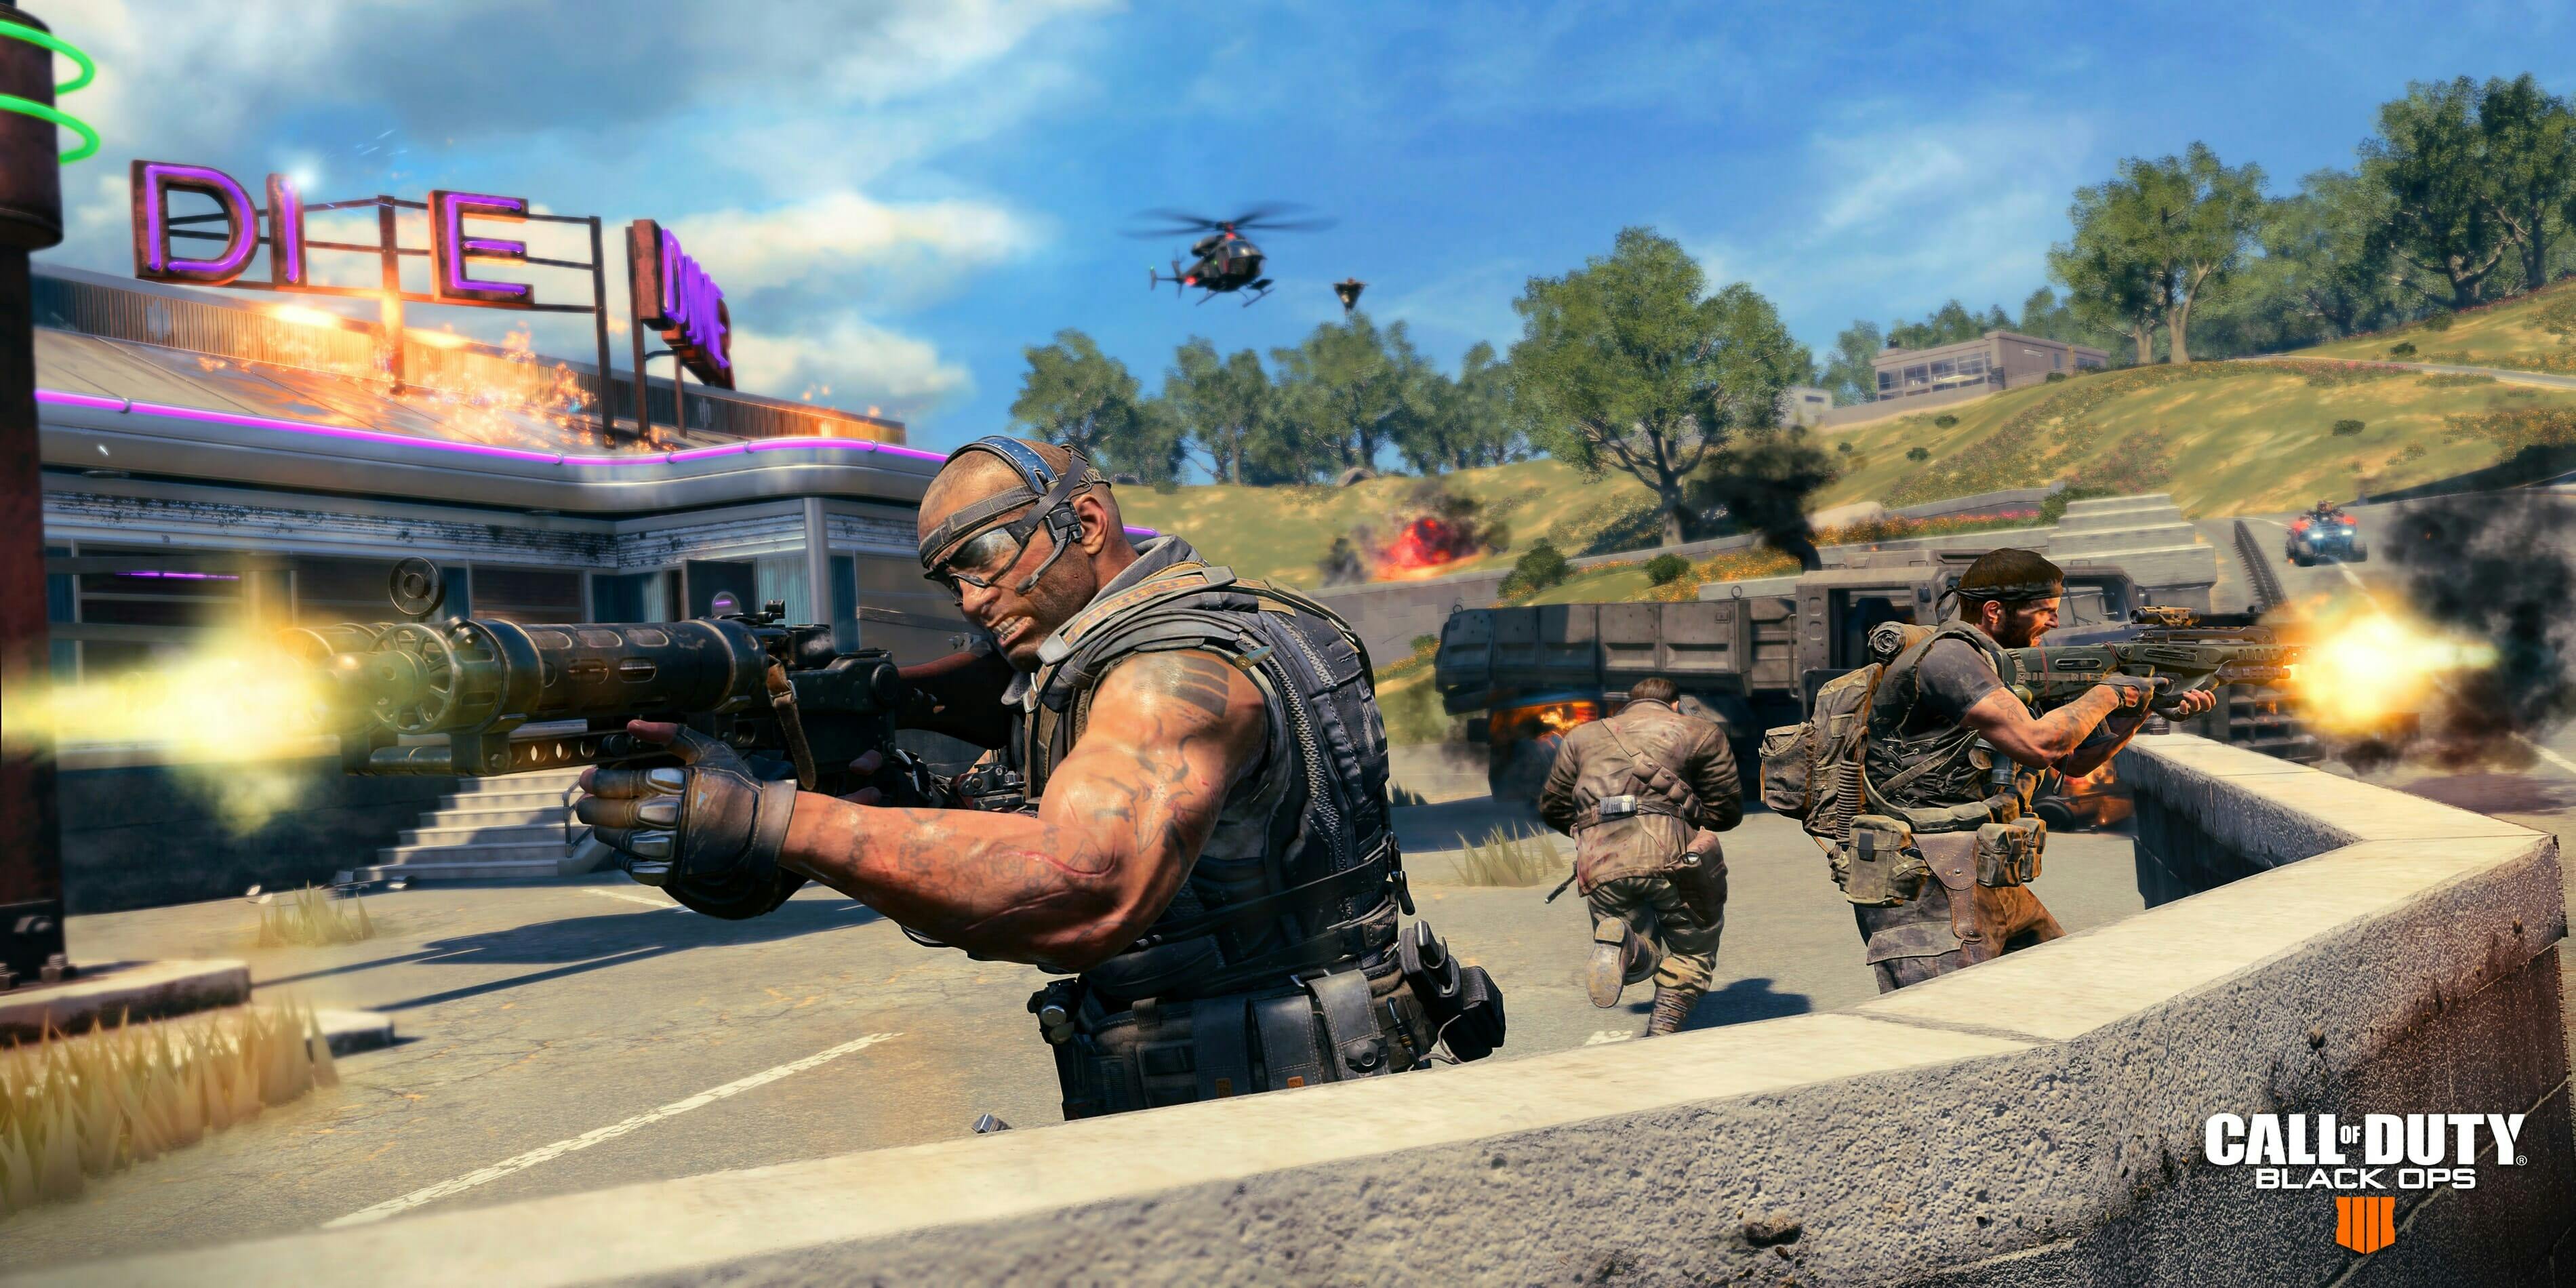 Pedagogie Accountant Nodig uit Review: Black Ops 4 Brings Big Changes for the Call of Duty Franchise